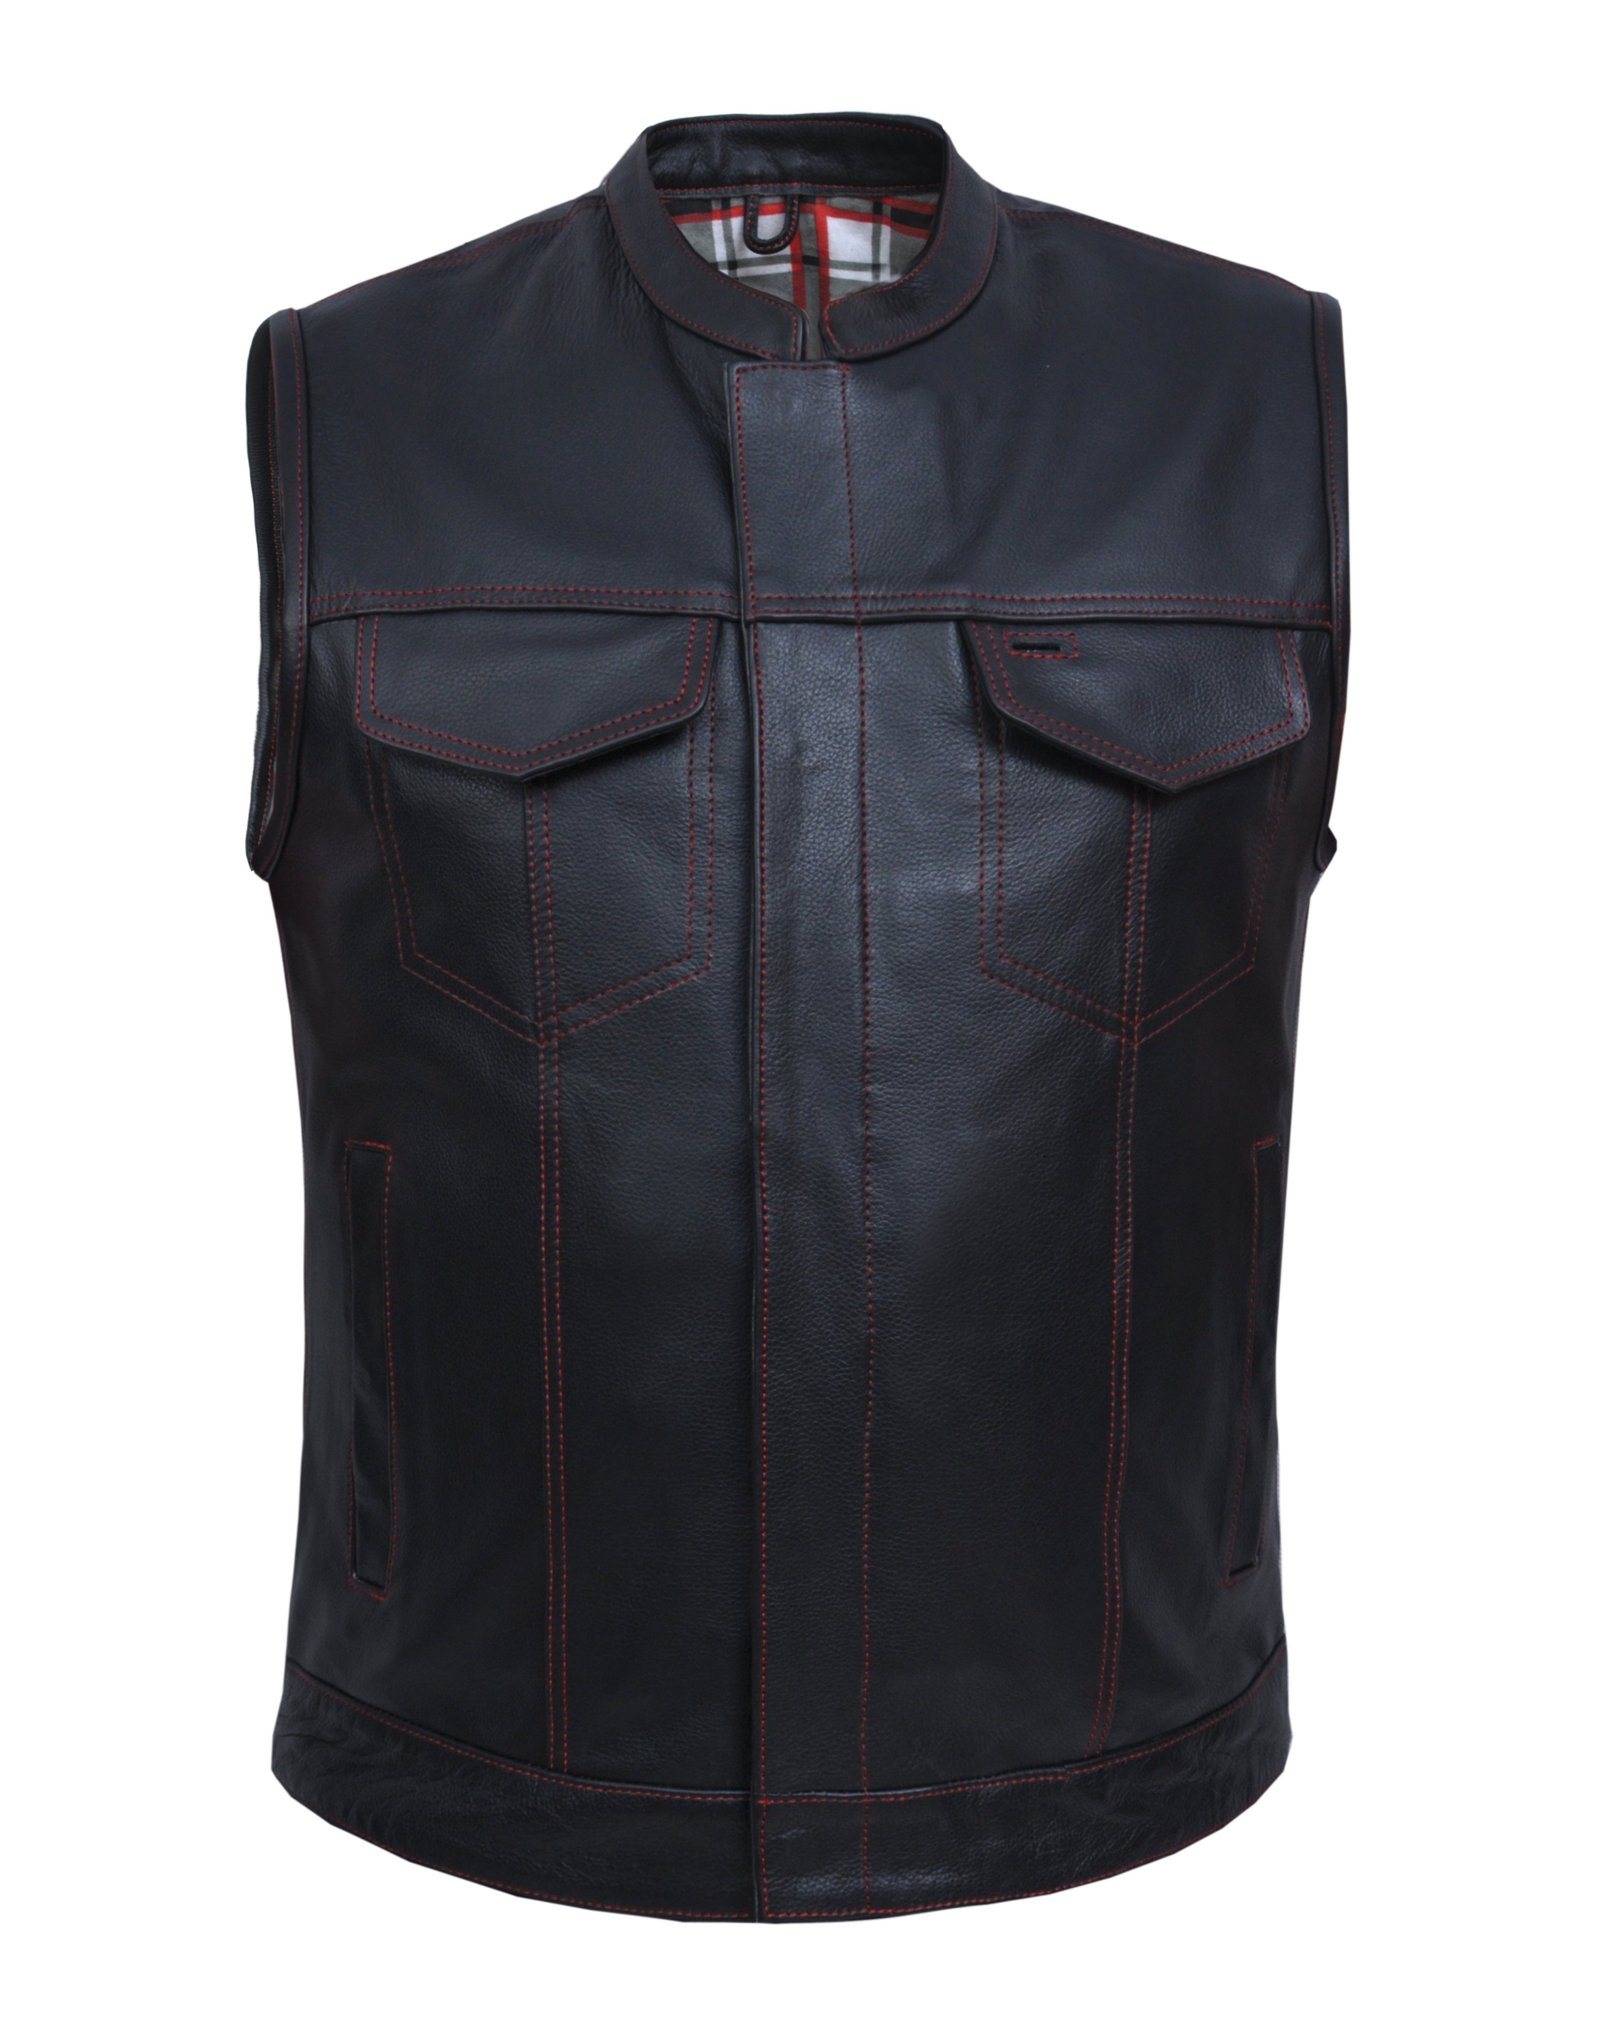 Leather Motorcycle Vest - Men's -  Black and Red Flannel Liner - 6664-01-UN